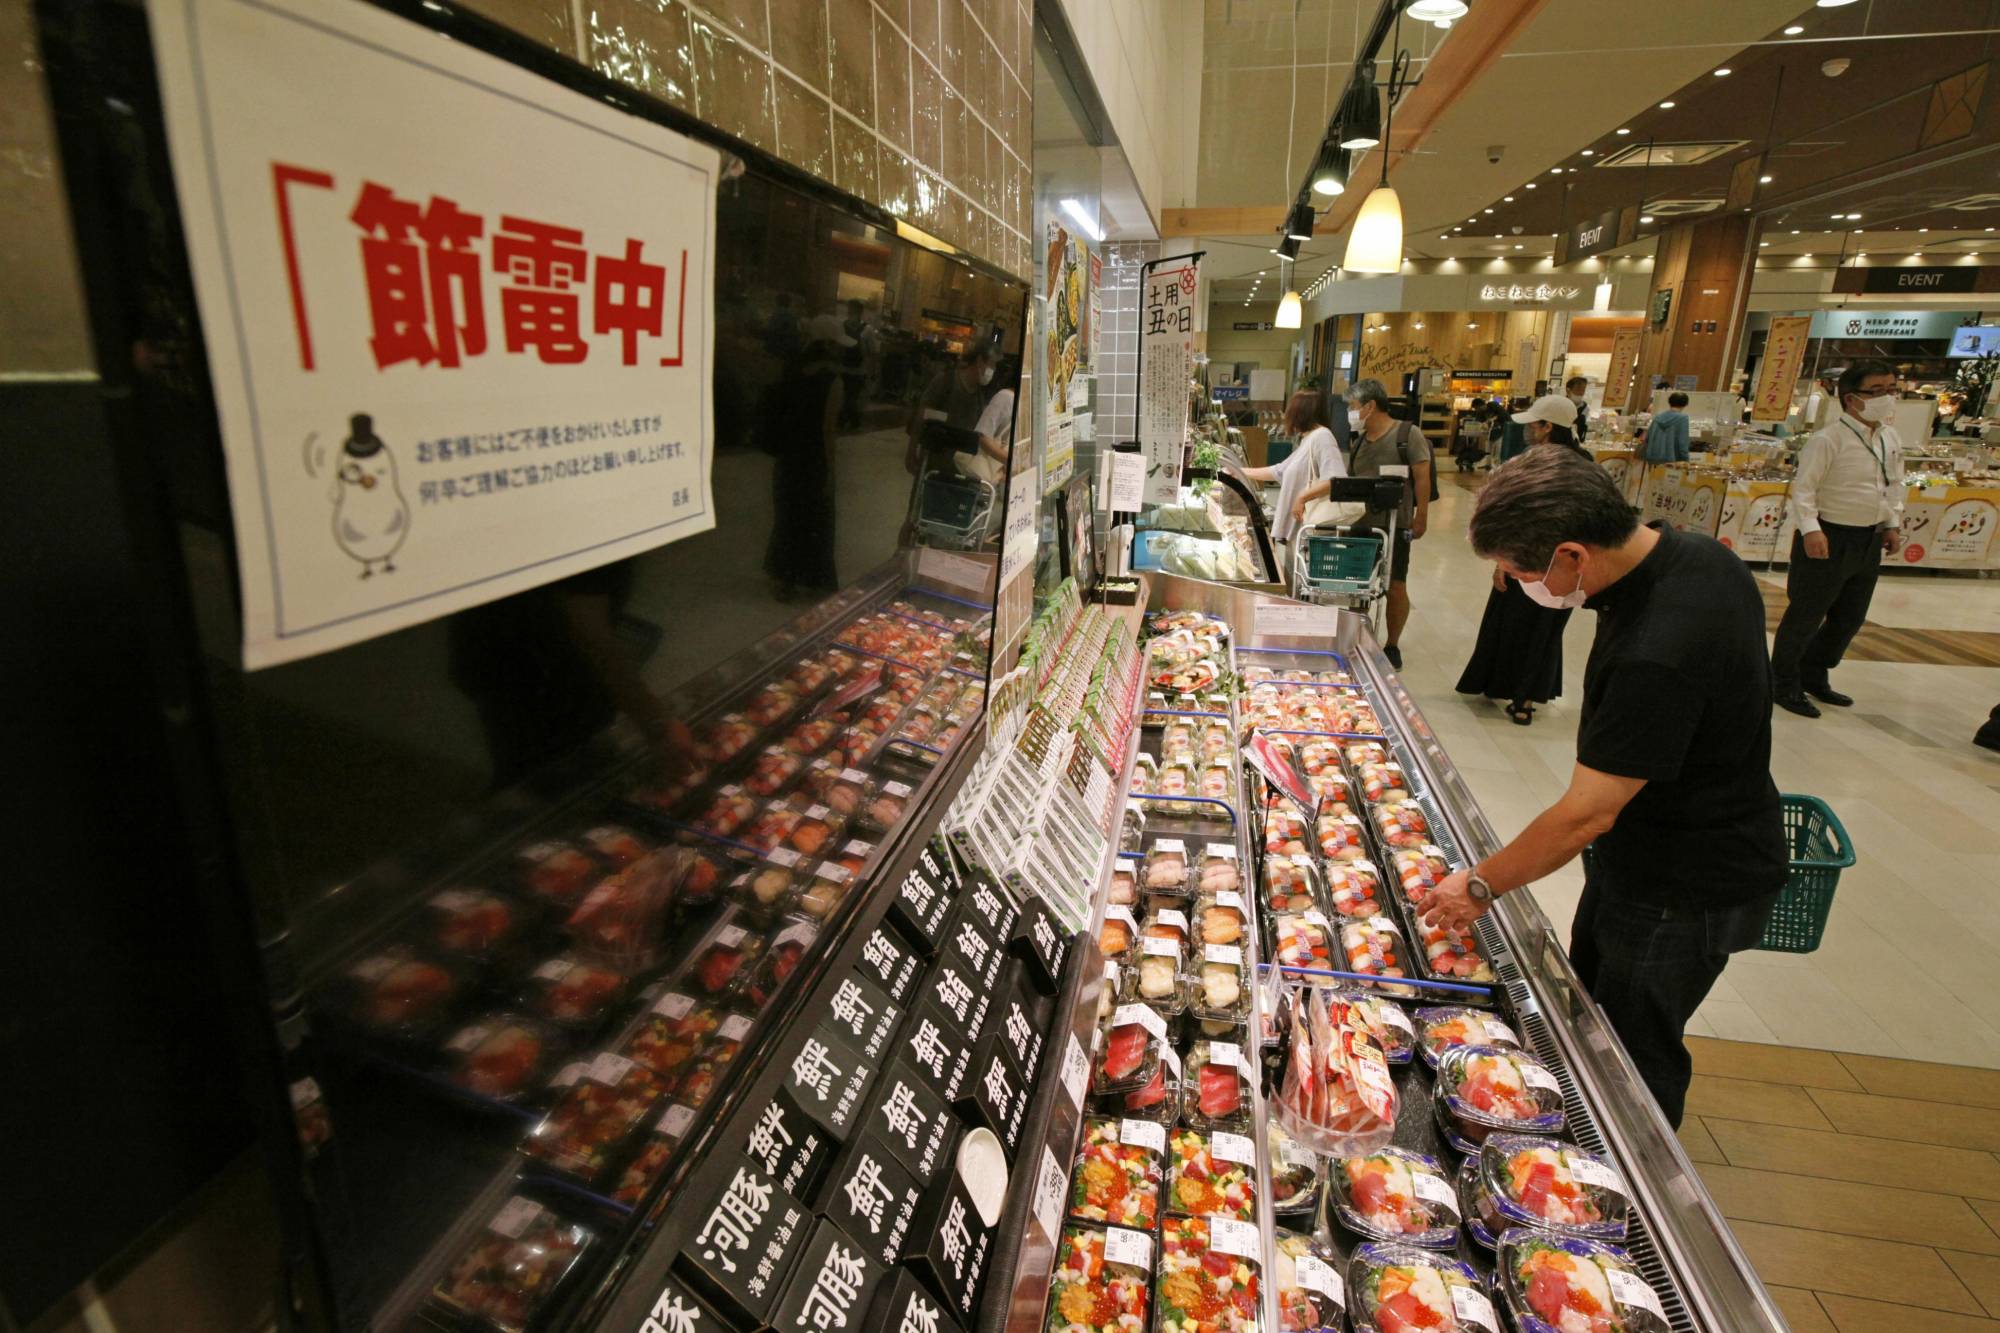 Promotional displays are turned off on Friday at a supermarket in Tokyo's Ota Ward as part of efforts to save electricity. | KYODO